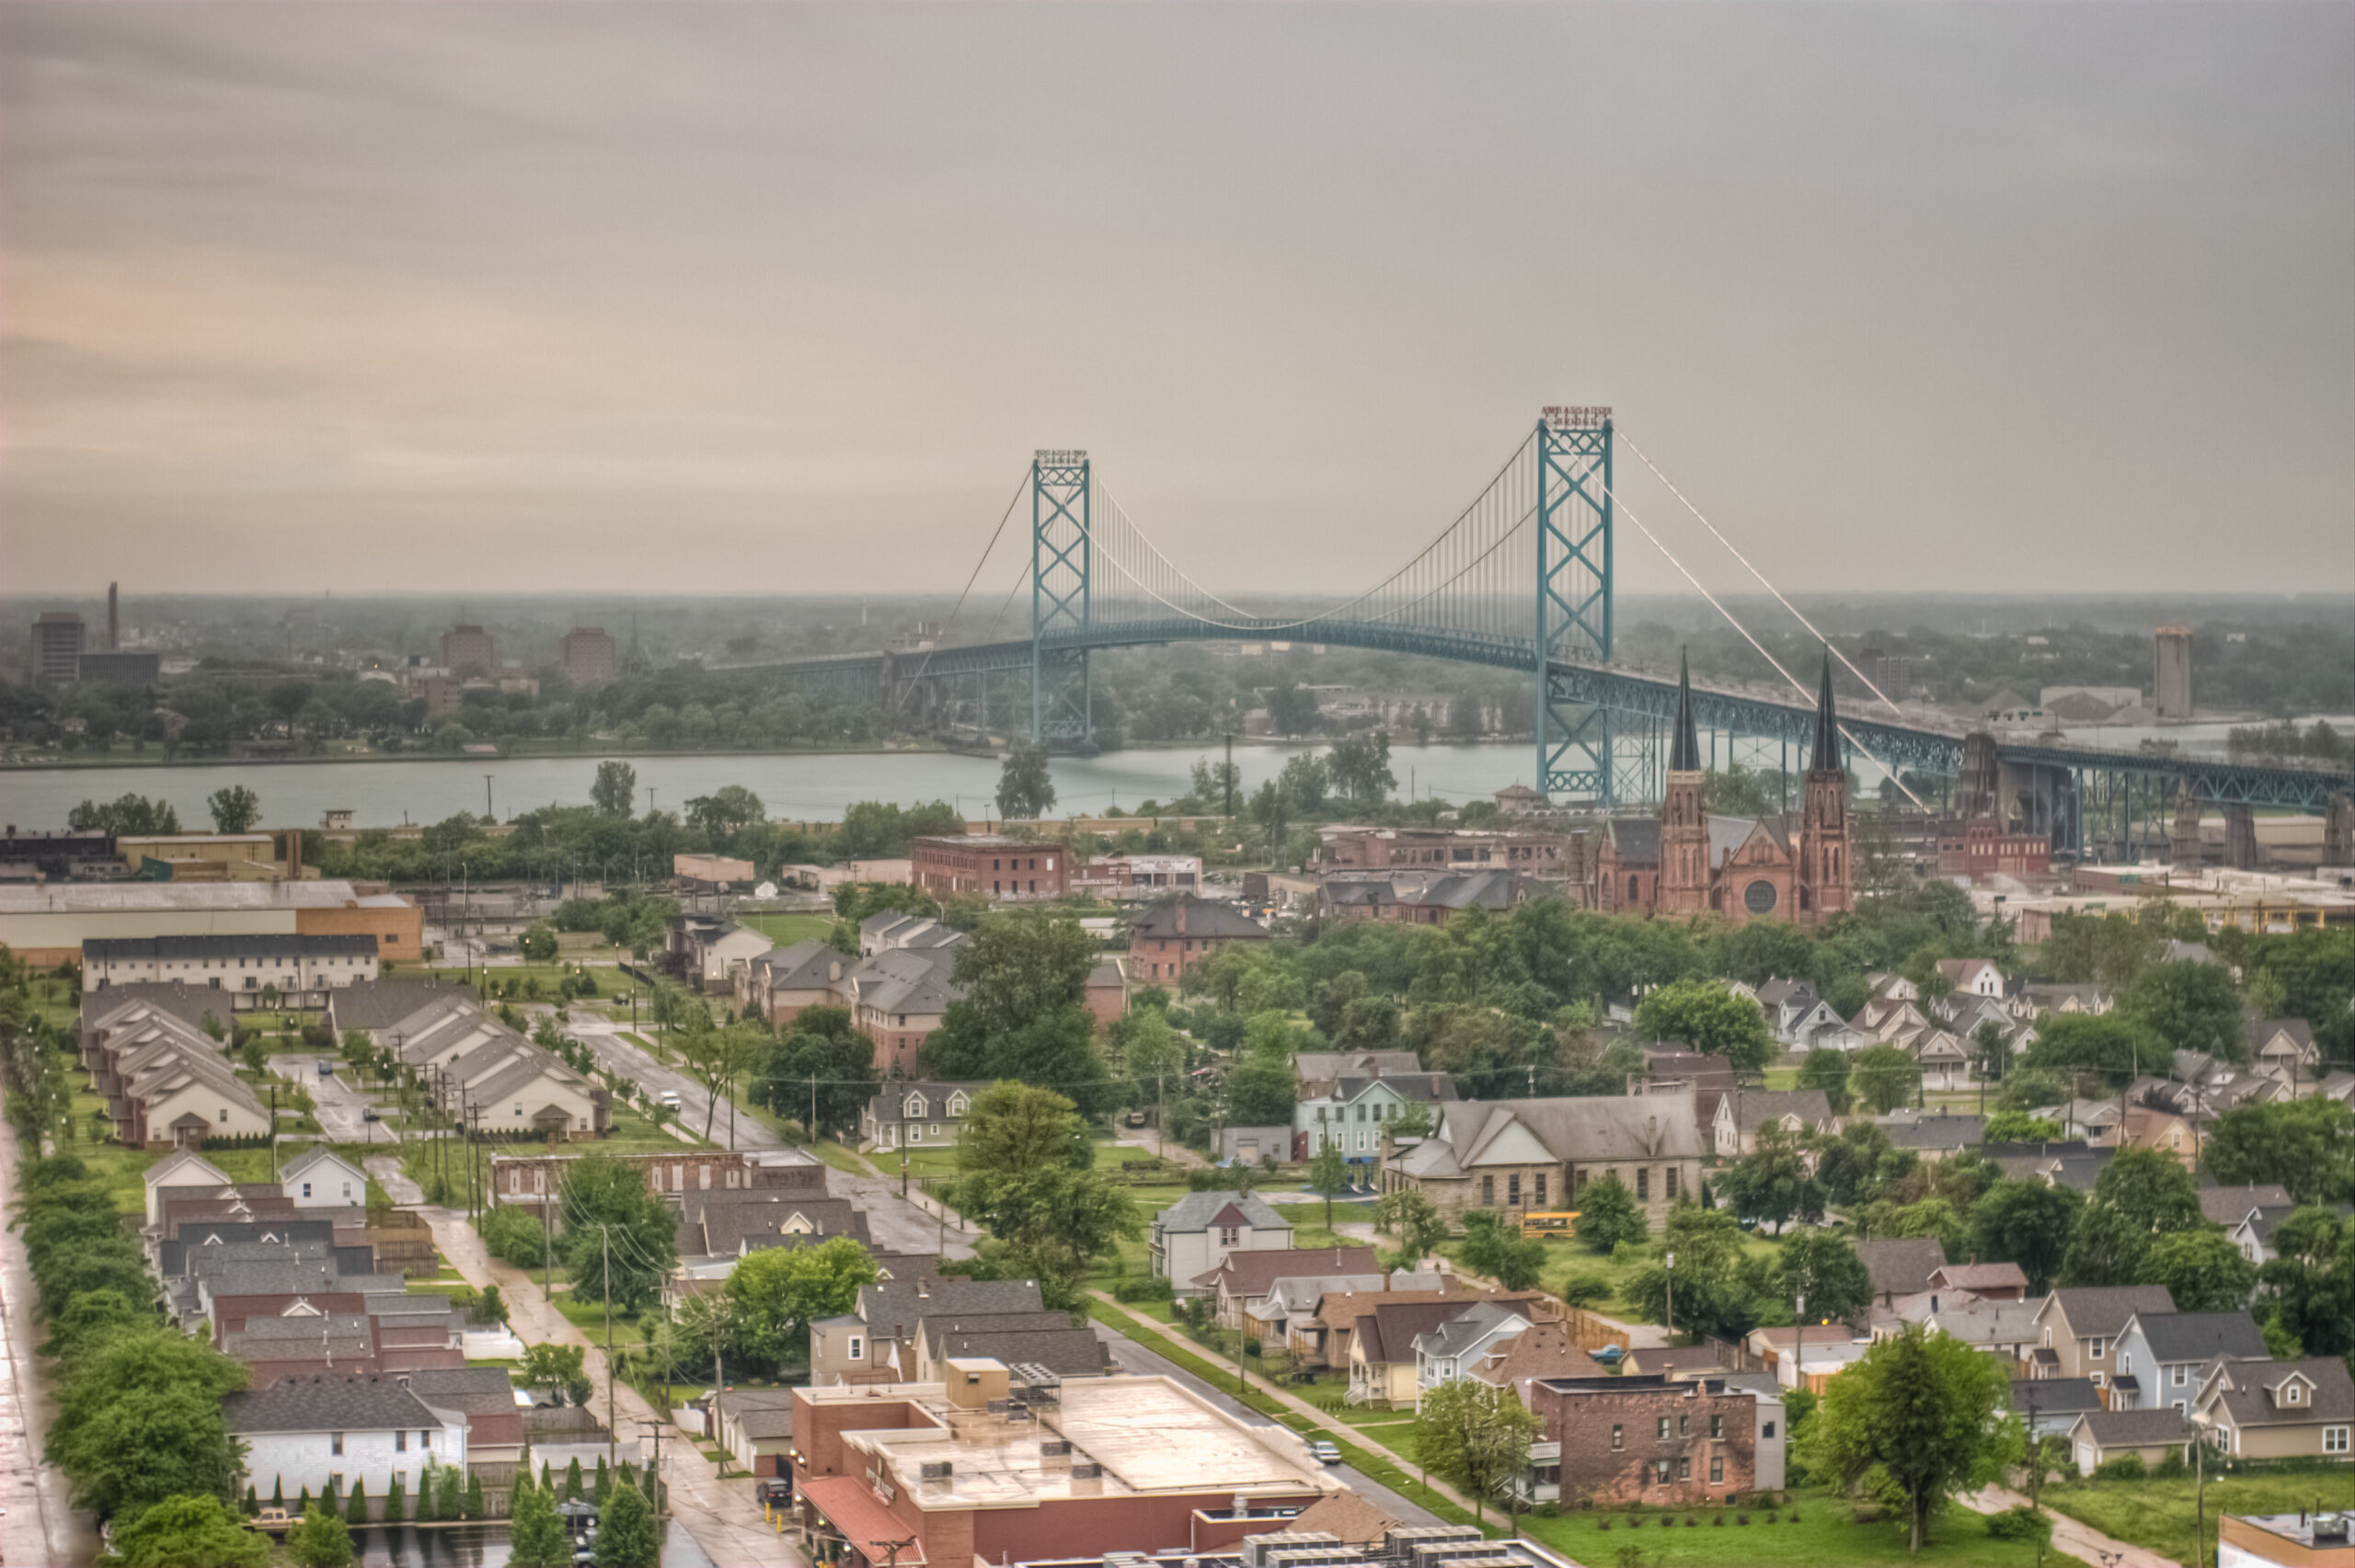 A view of the Ambassador Bridge, which connects Windsor, Ontario to Detroit, Michigan